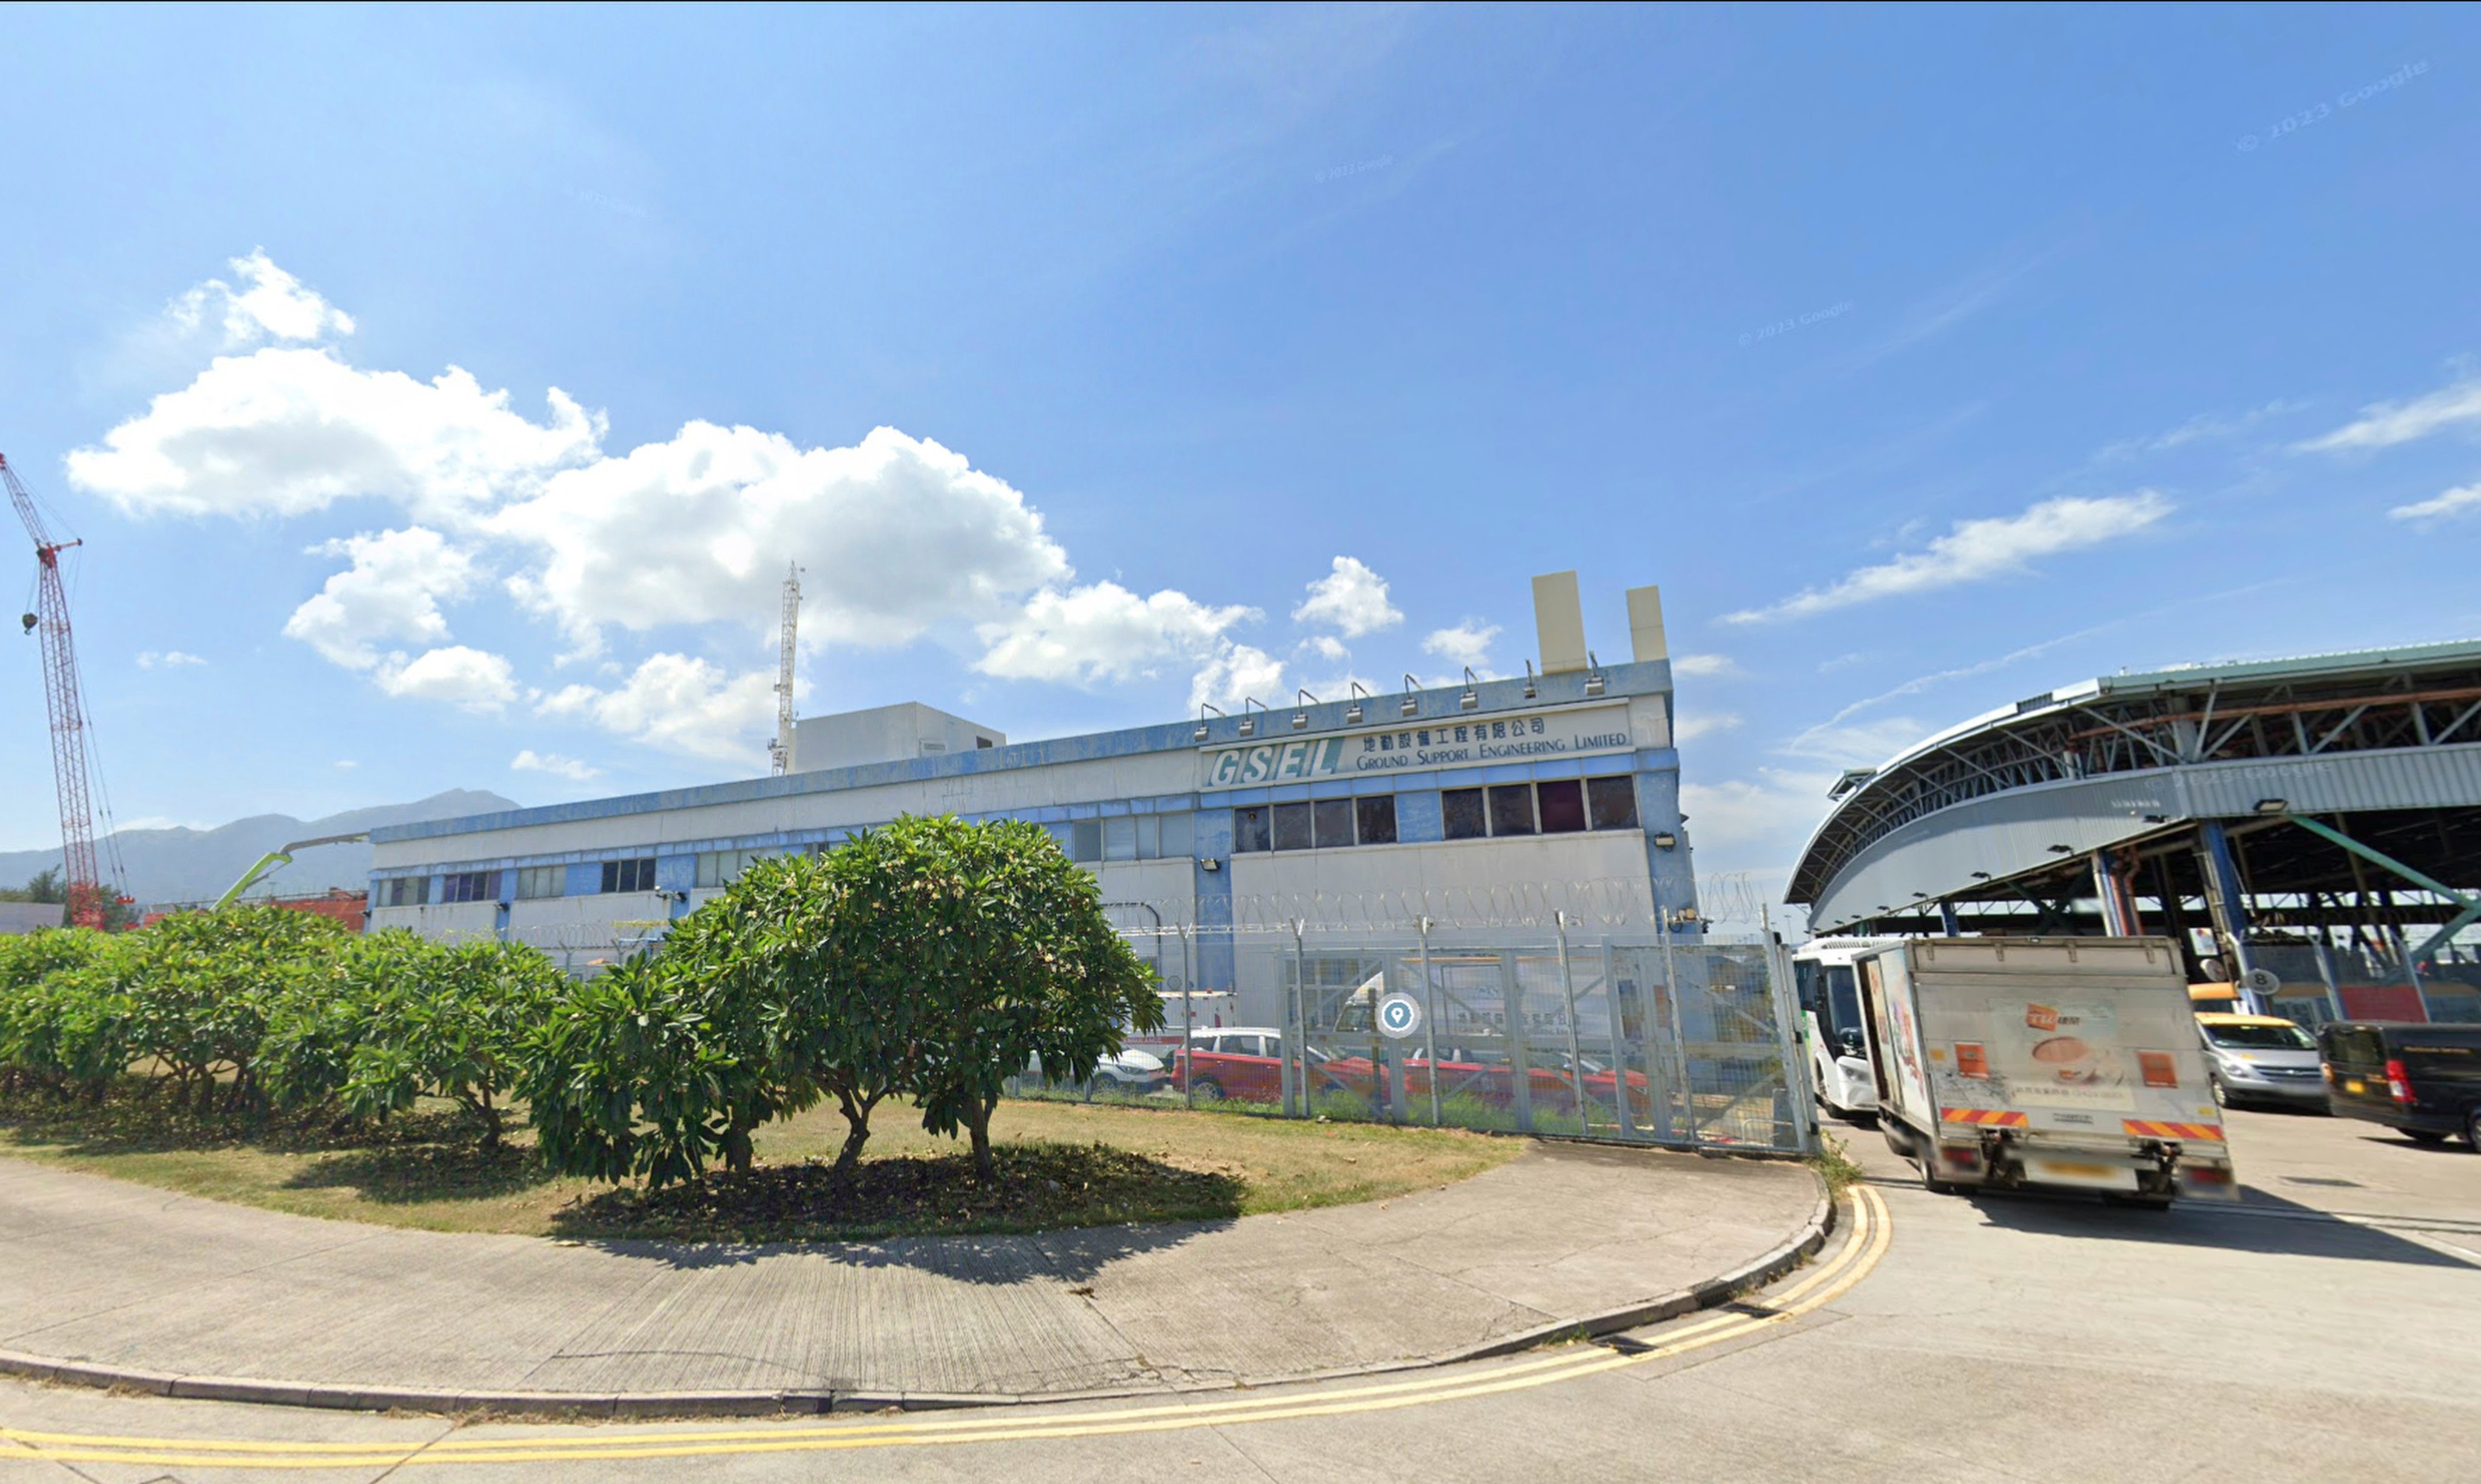 The incident occurred at a ground support engineering company on 7 Catering Road West near the airport. Photo: Google